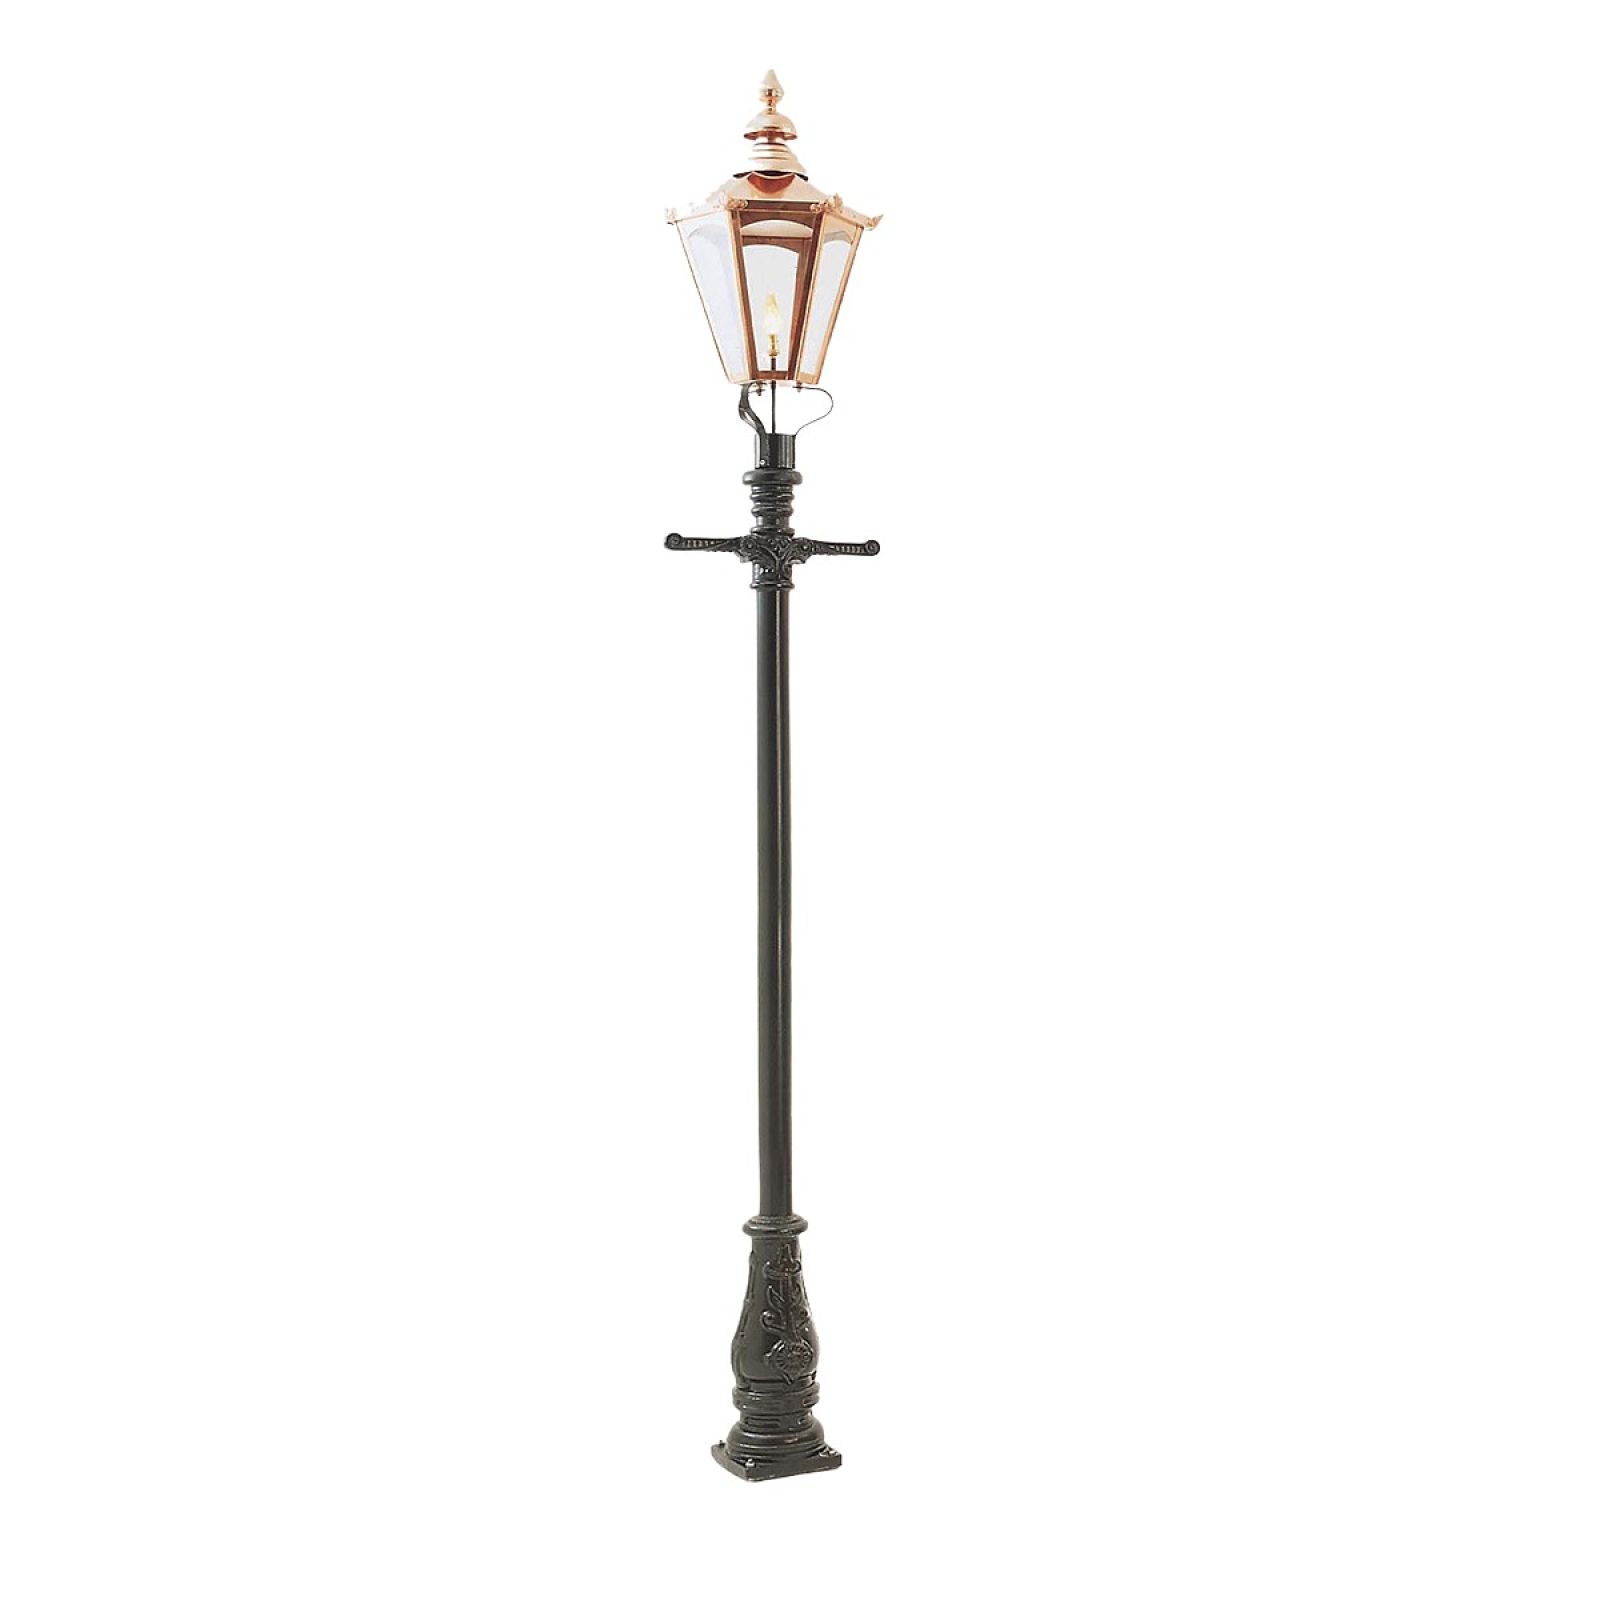 Lamp post 3100mm high and large copper hexagonal lantern